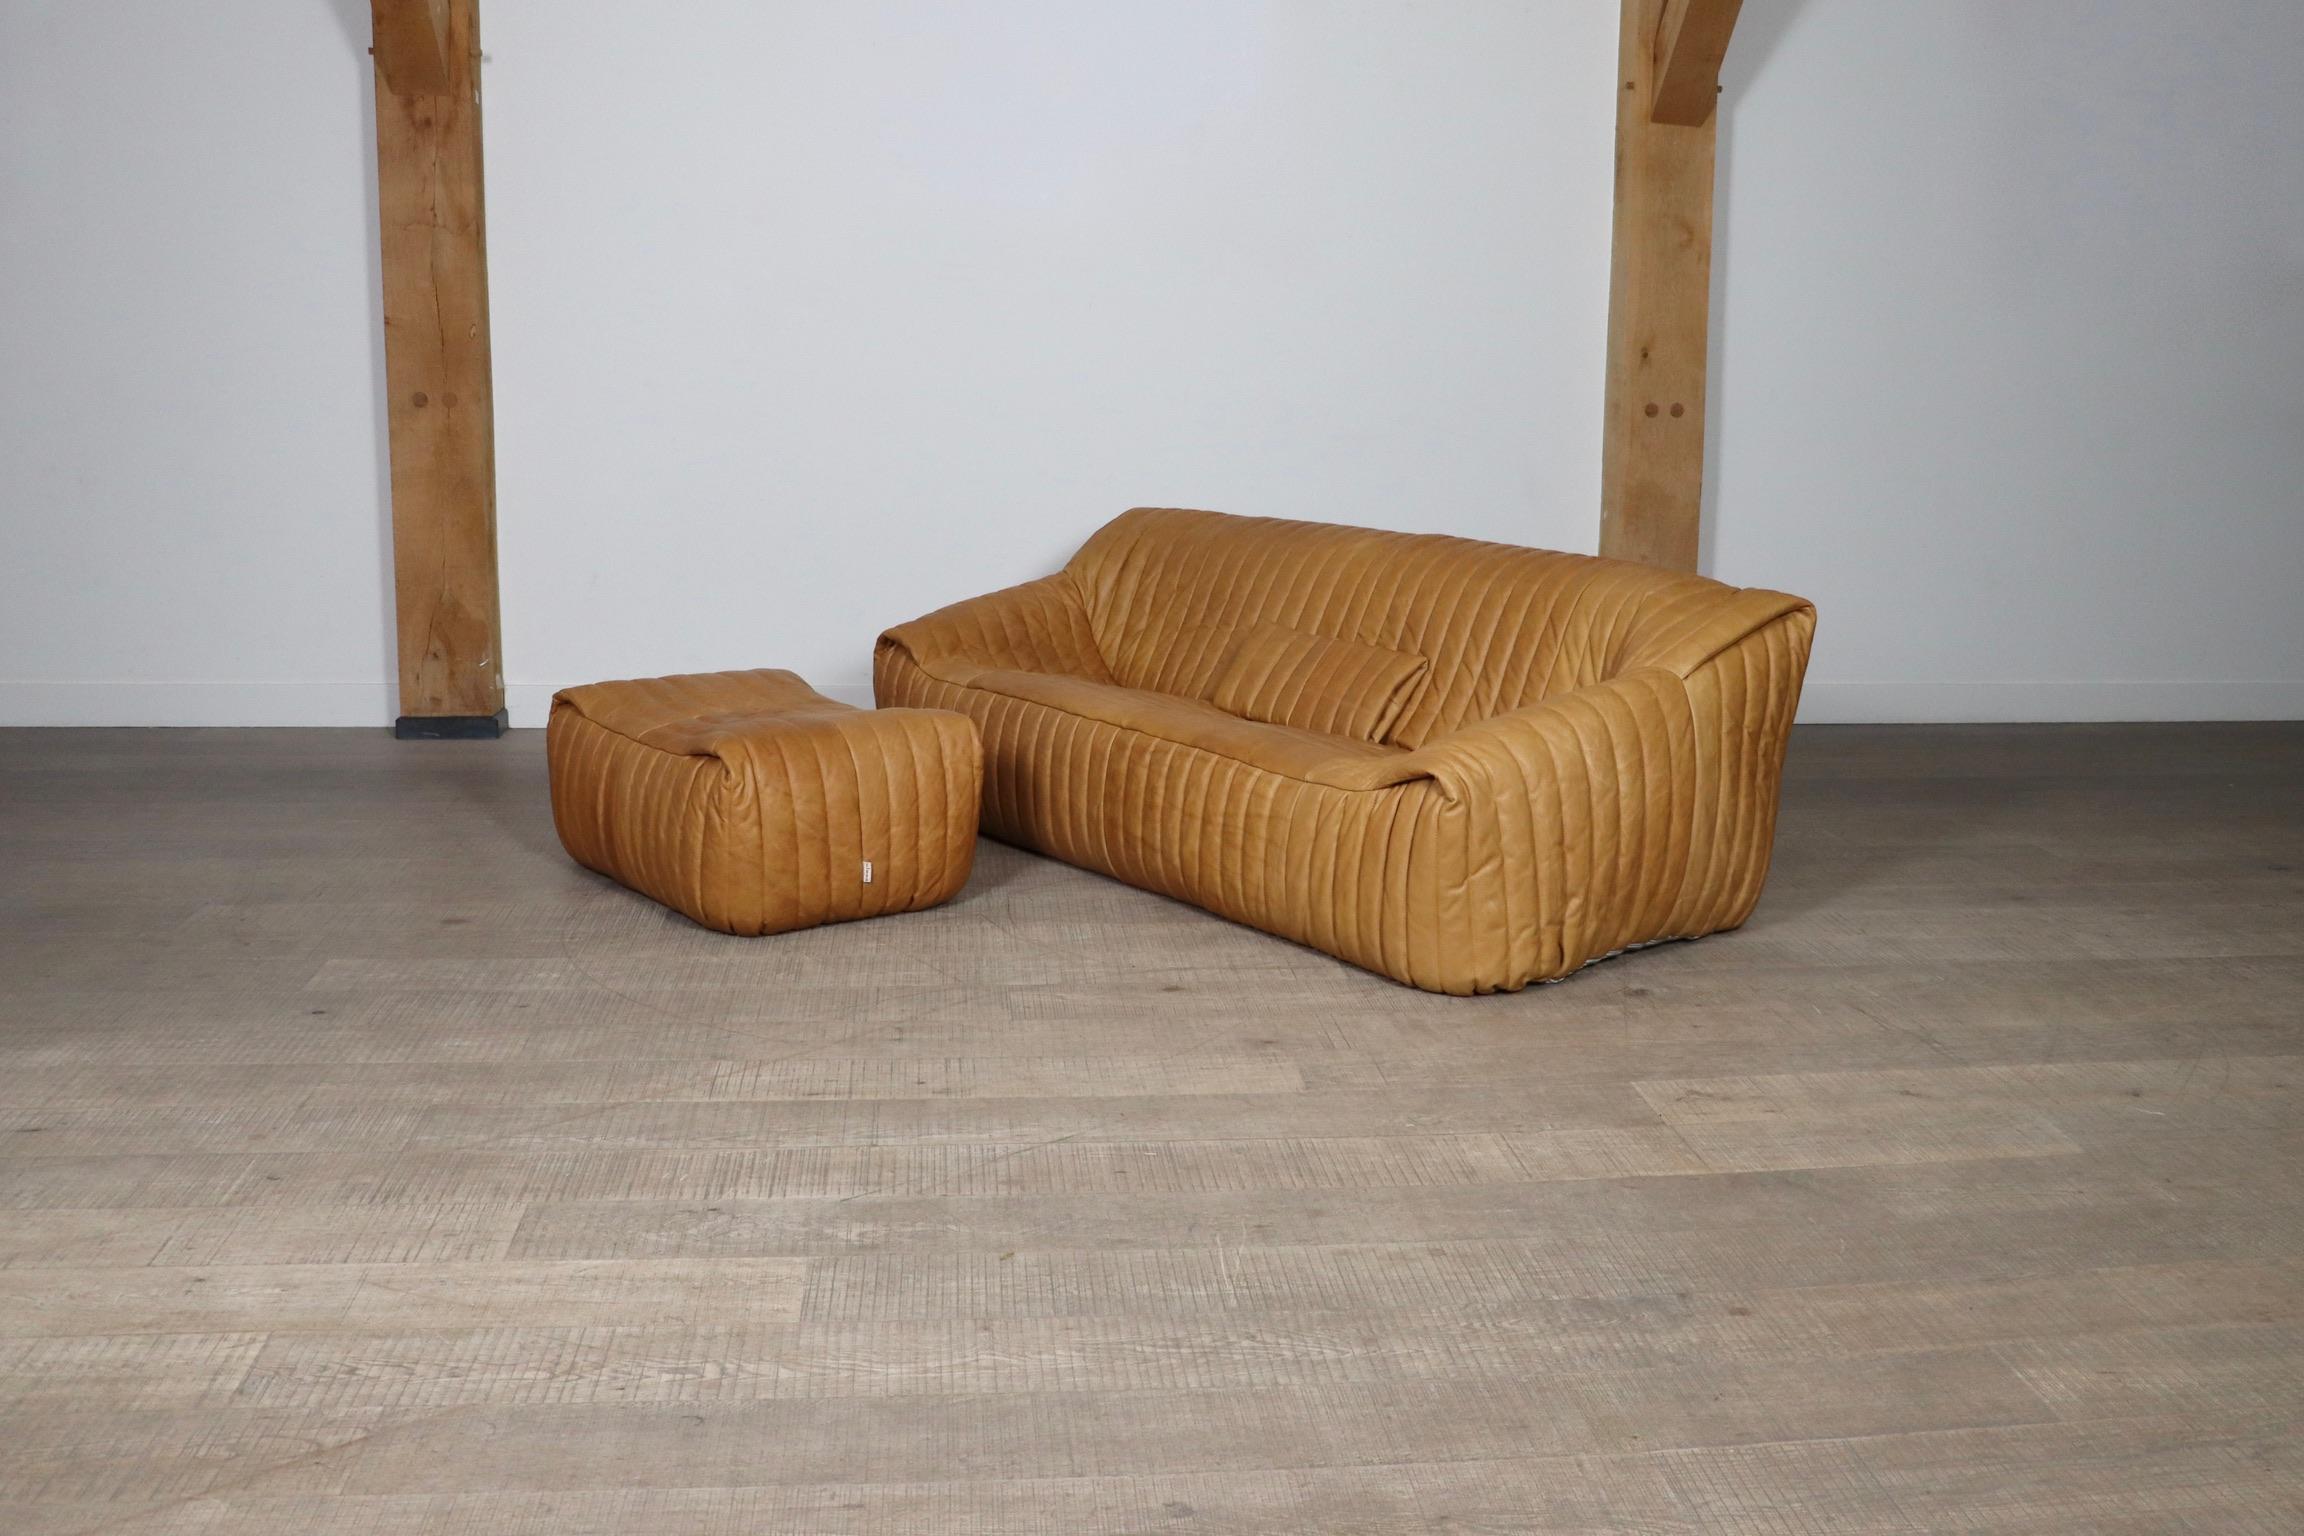 Beautiful three seater sofa with ottoman in stunning tan leather, by Annie Hieronimus for Cinna, a division of Ligne Roset, France 1970s. This incredibly comfortable, yet lightweight design will instantly bring character to any room! Reupholstered